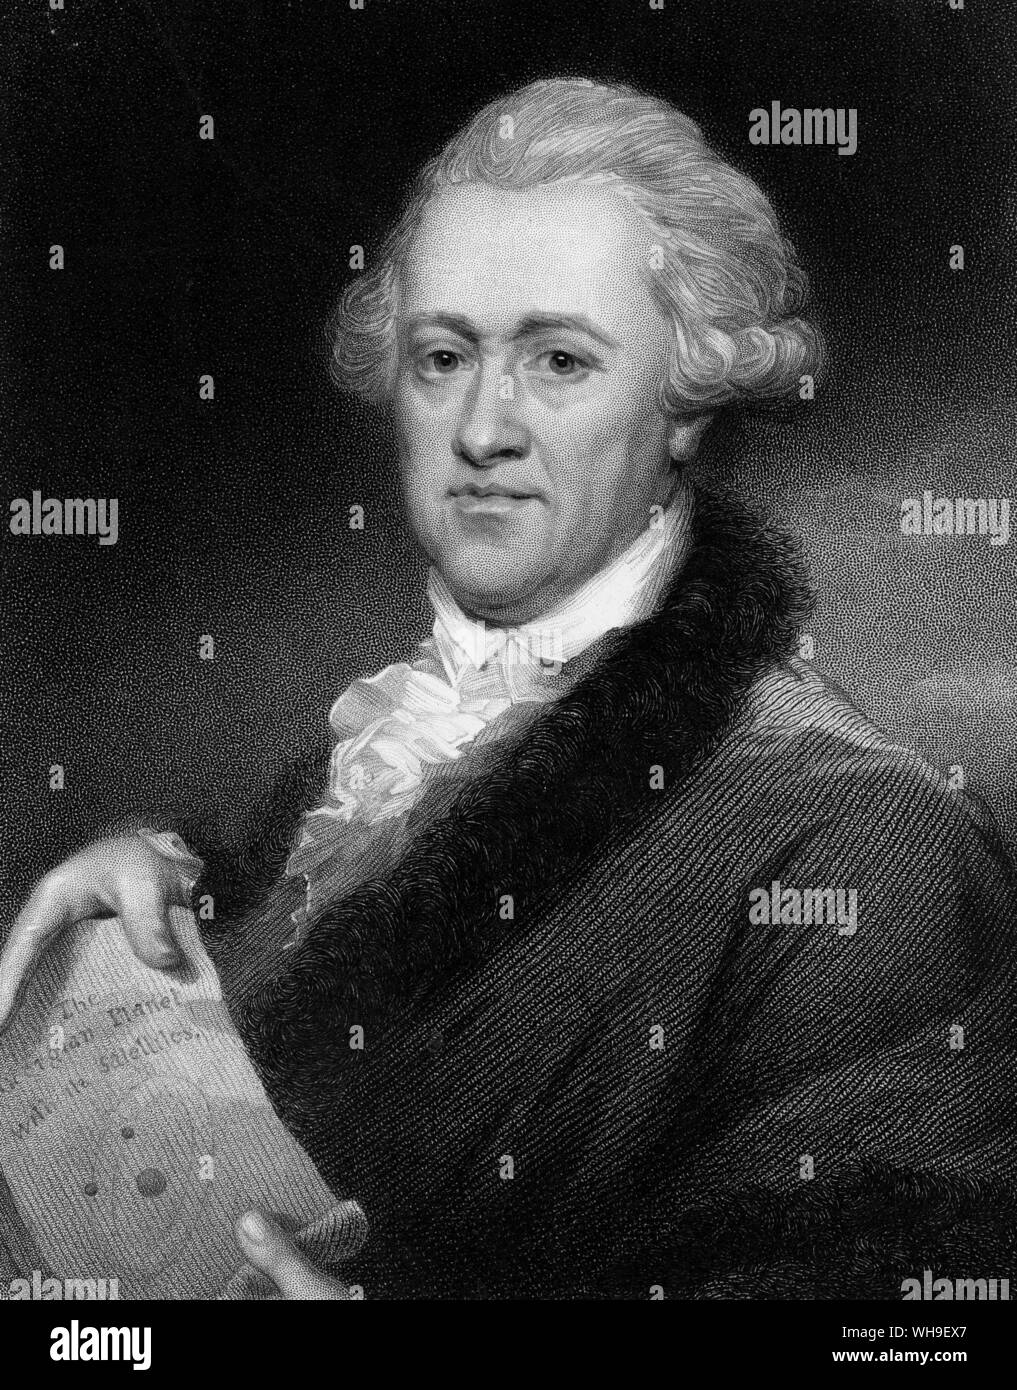 William Herschel (1738-1822). German-born English astronomer. Hew was a skilled telescope maker and pioneered the study of binary stars and nebulae. He discovered the planet Uranus in 1781. Stock Photo